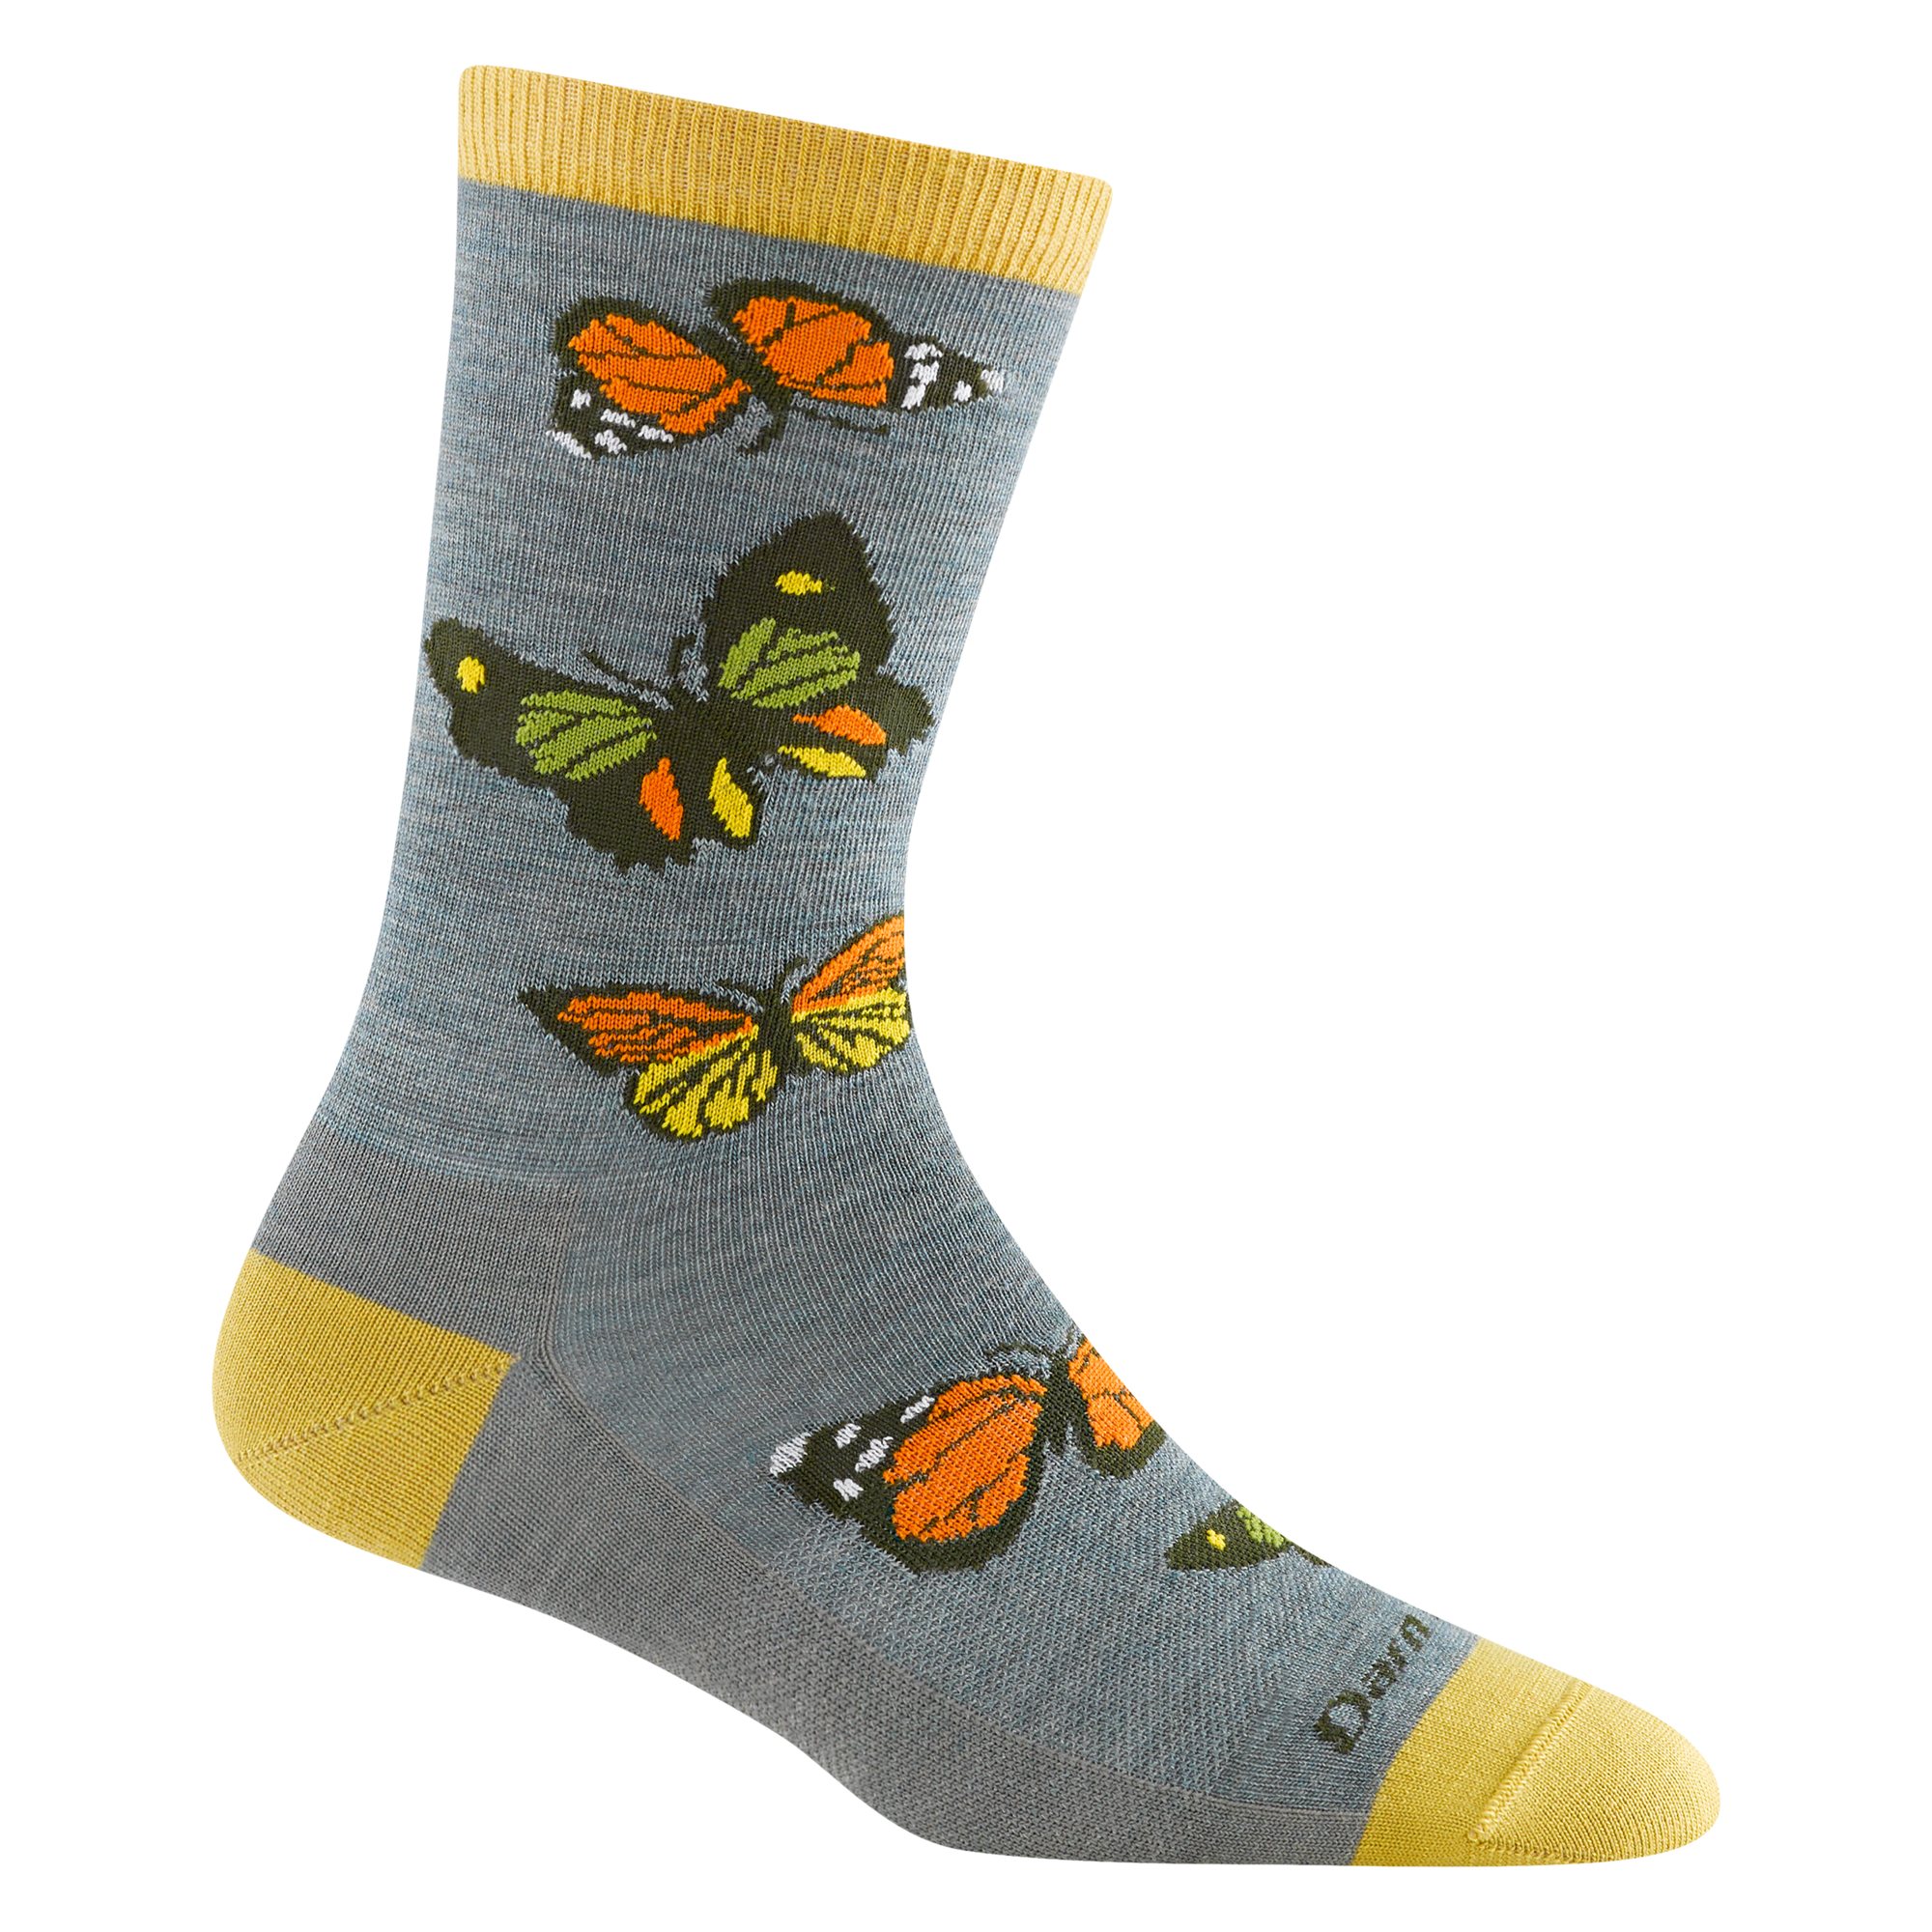 6109 Flutter in seafoam featuring yellow heel/toe/cuff with gray body and orange and yellow butterfly design 